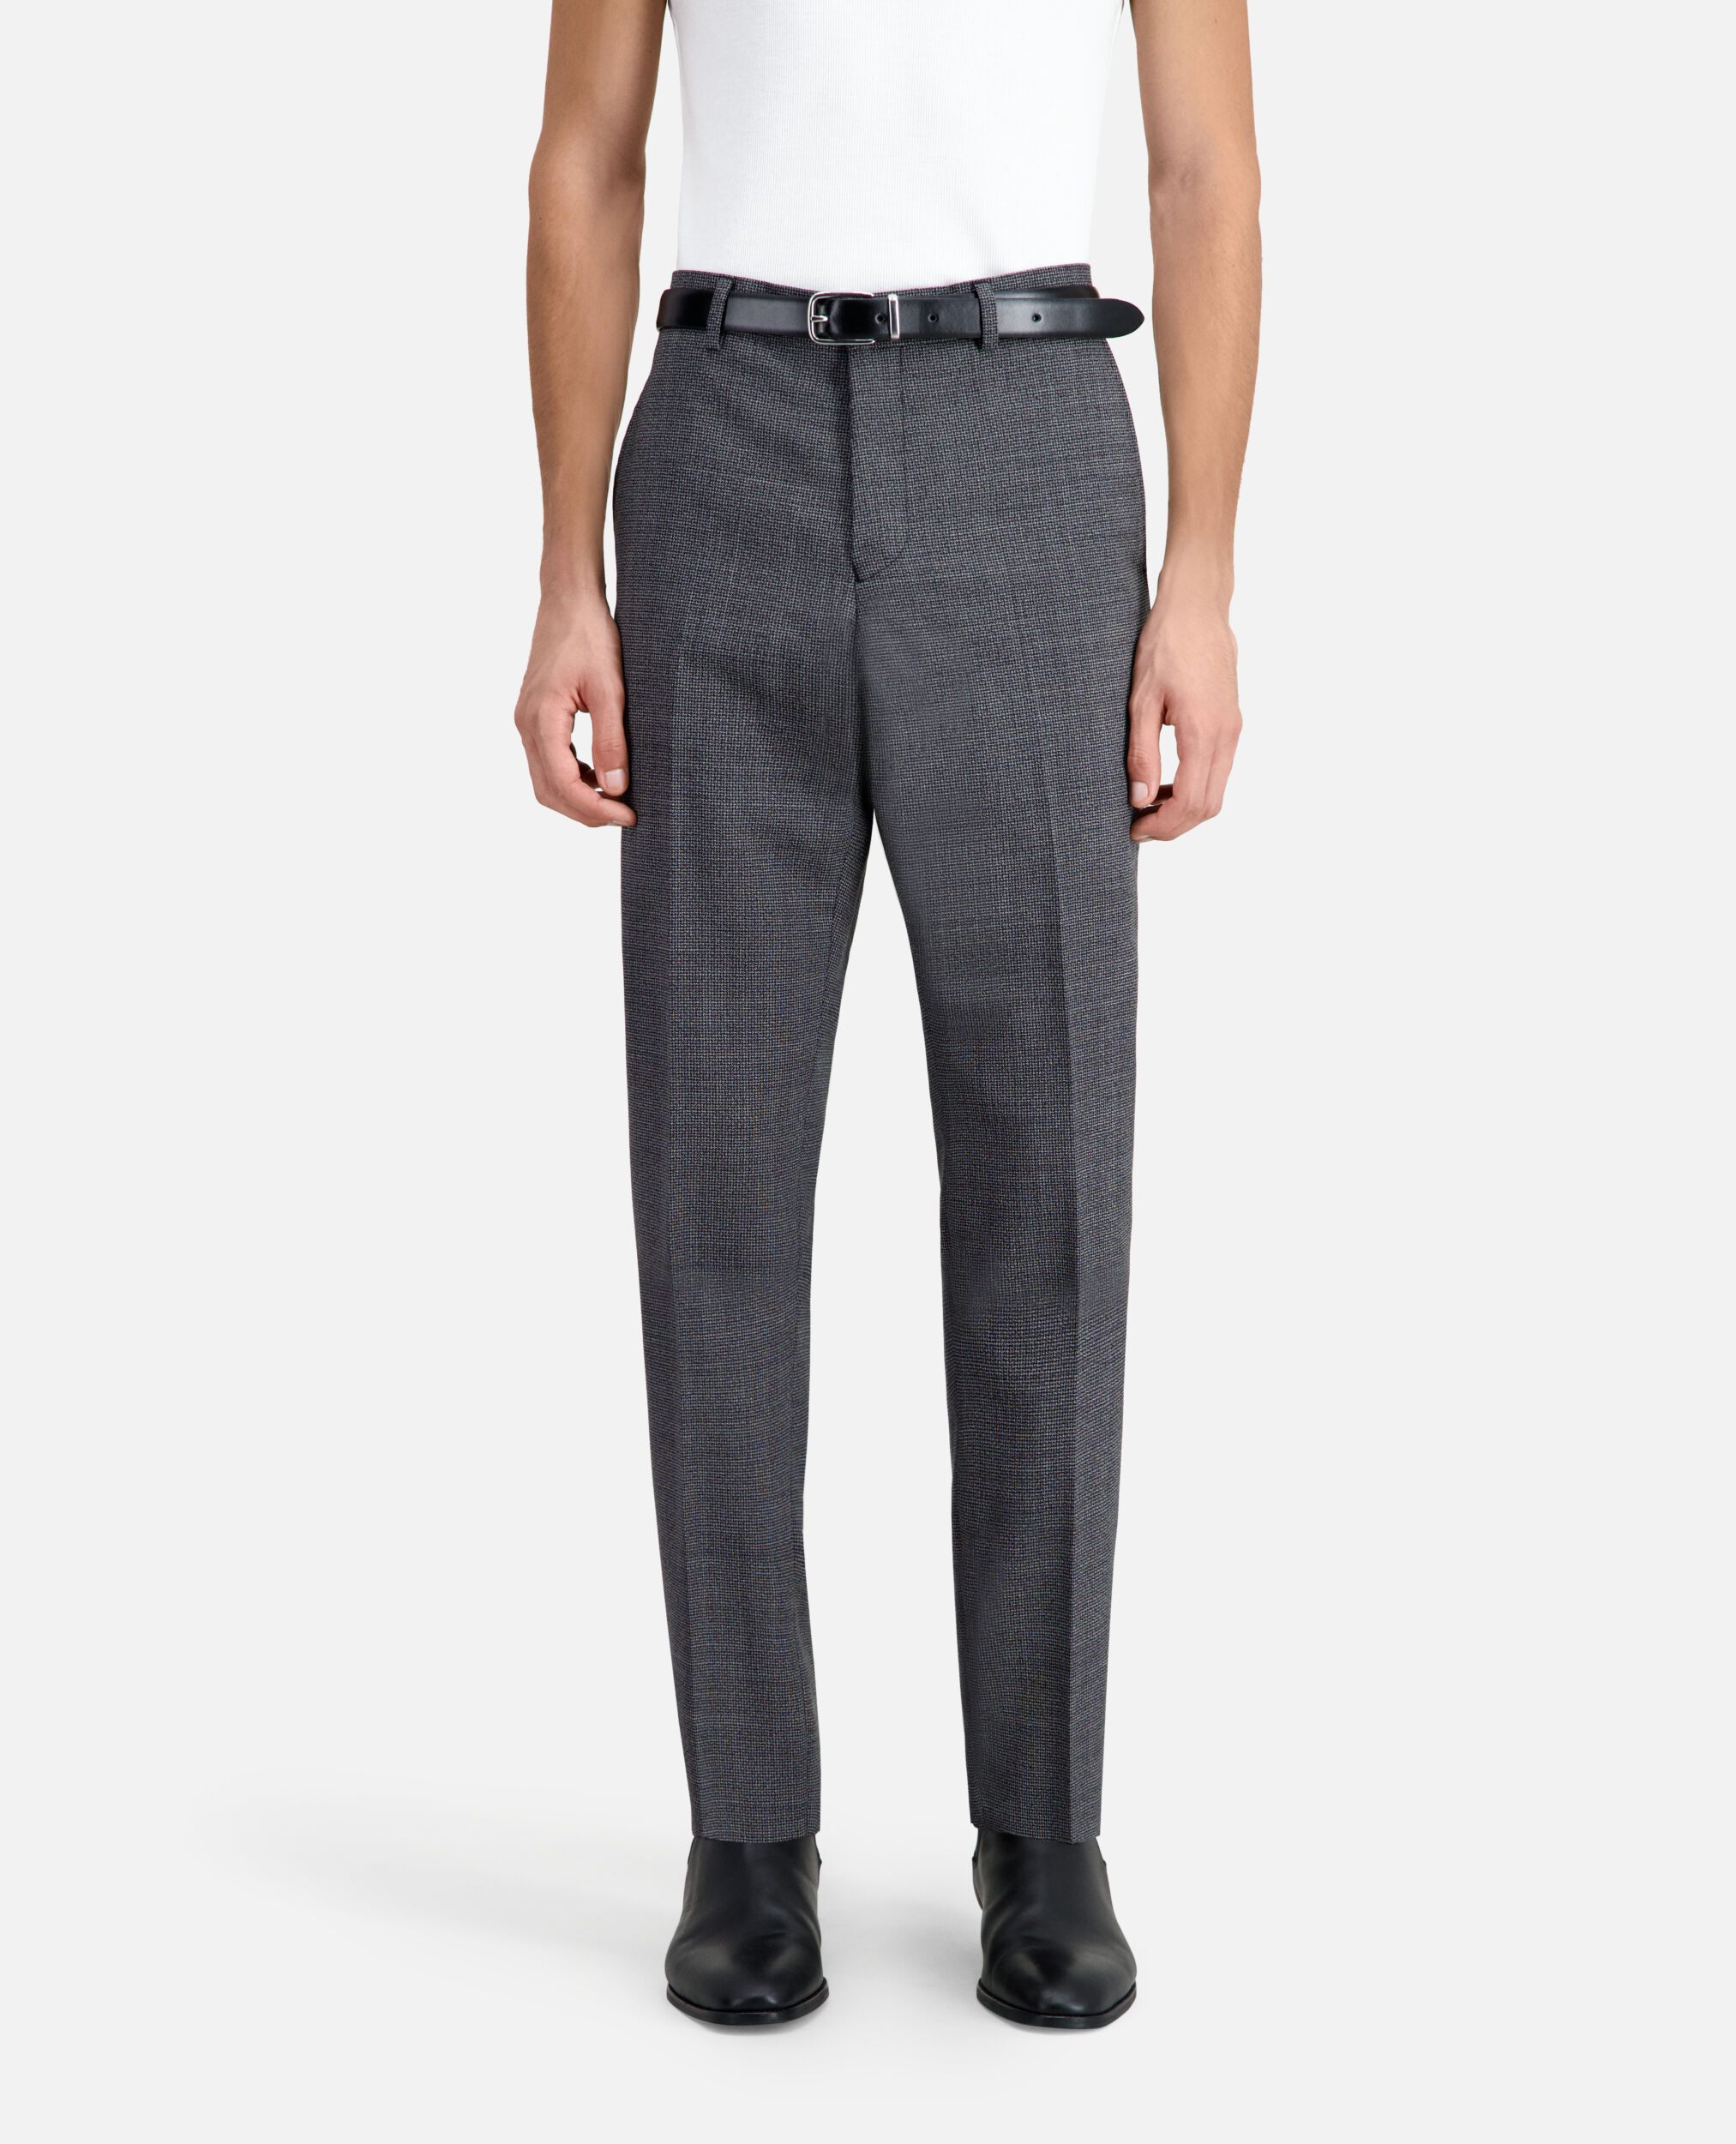 Discover 140+ wool suit trousers